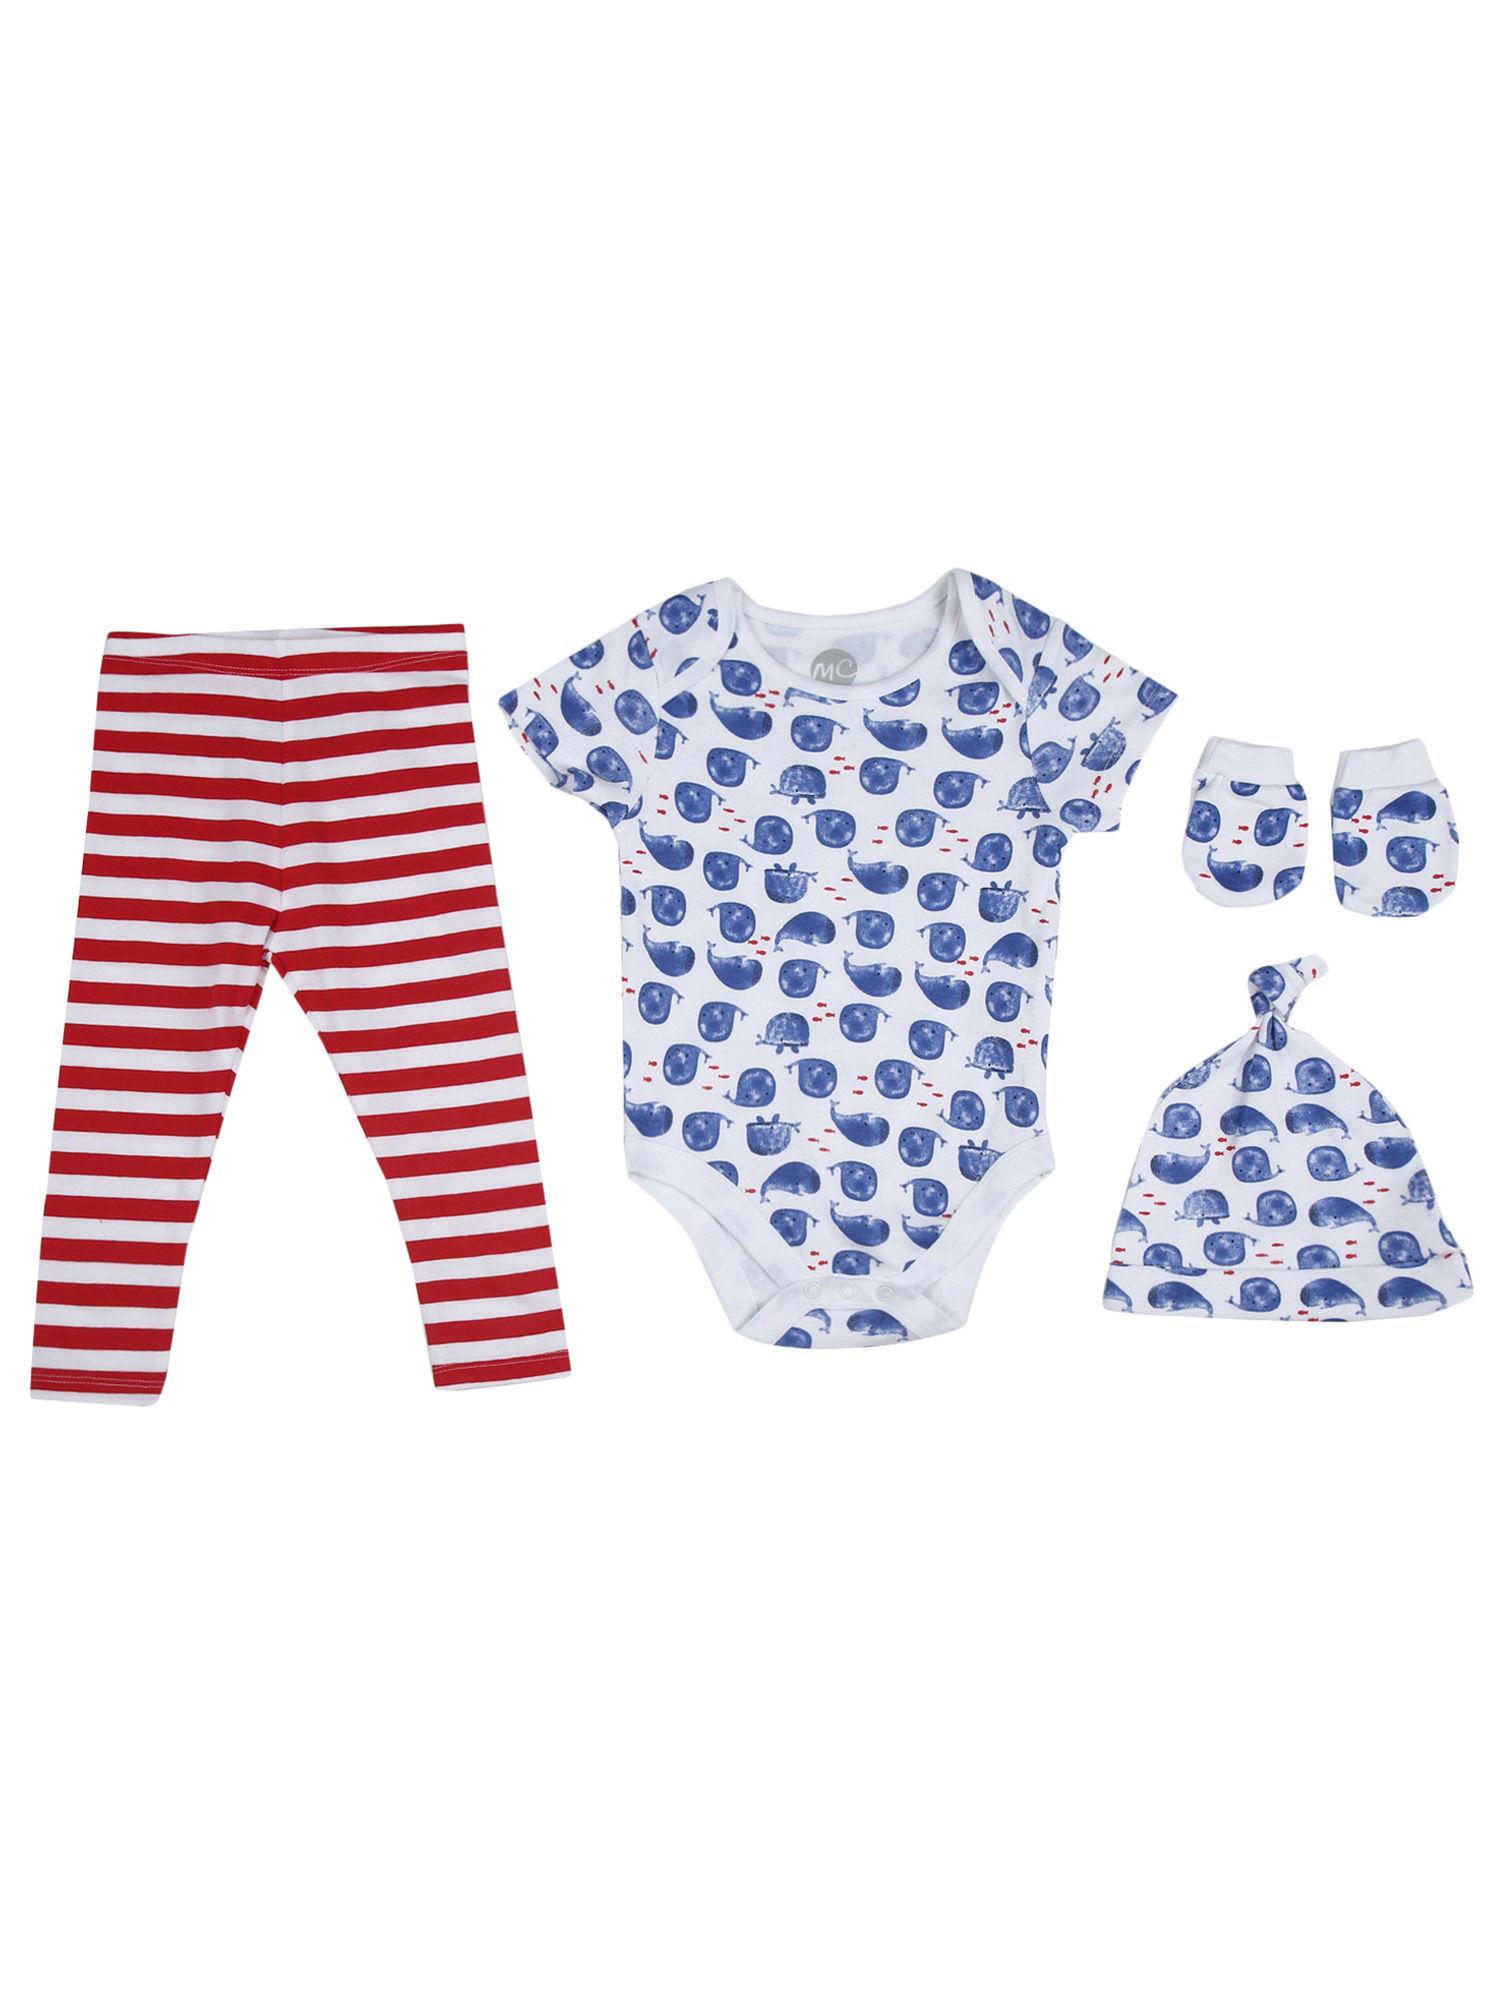 mother care whale print set for bodysuit and pyjama with socks & cap (set of 4)